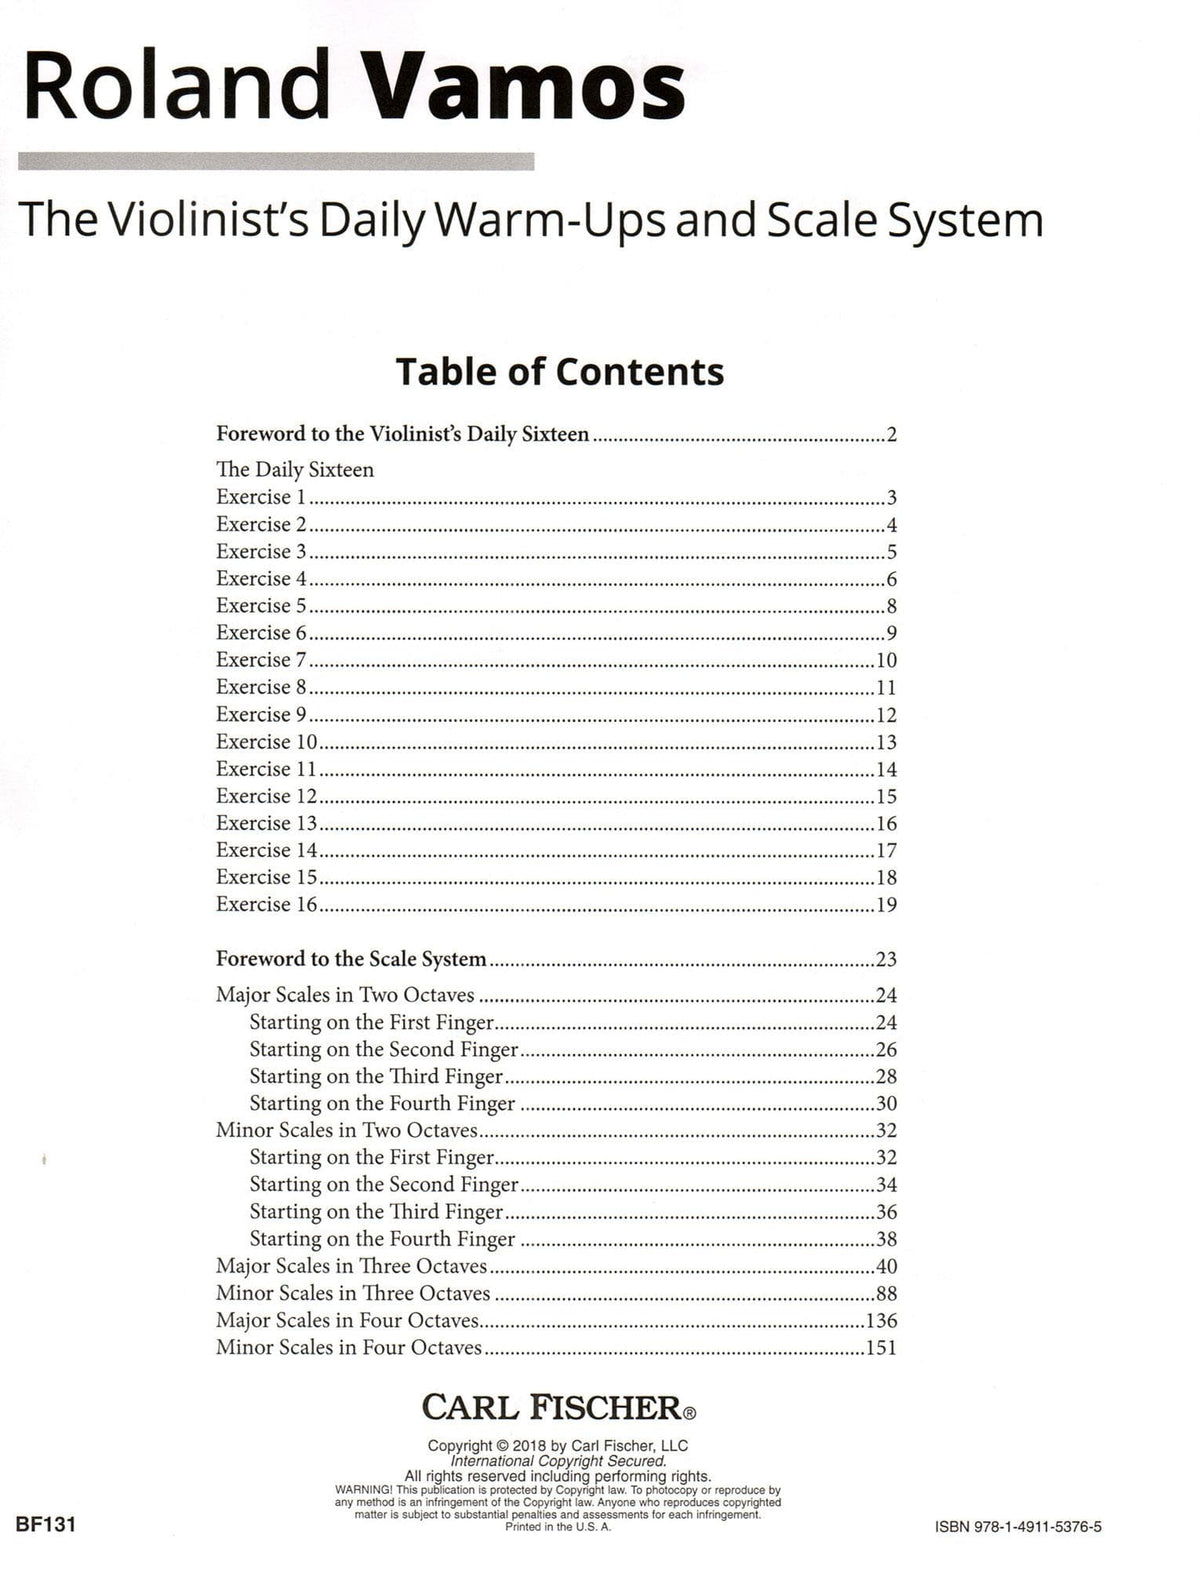 Vamos, Roland - The Violinist's Daily Warm Ups and Scale System - Carl Fischer